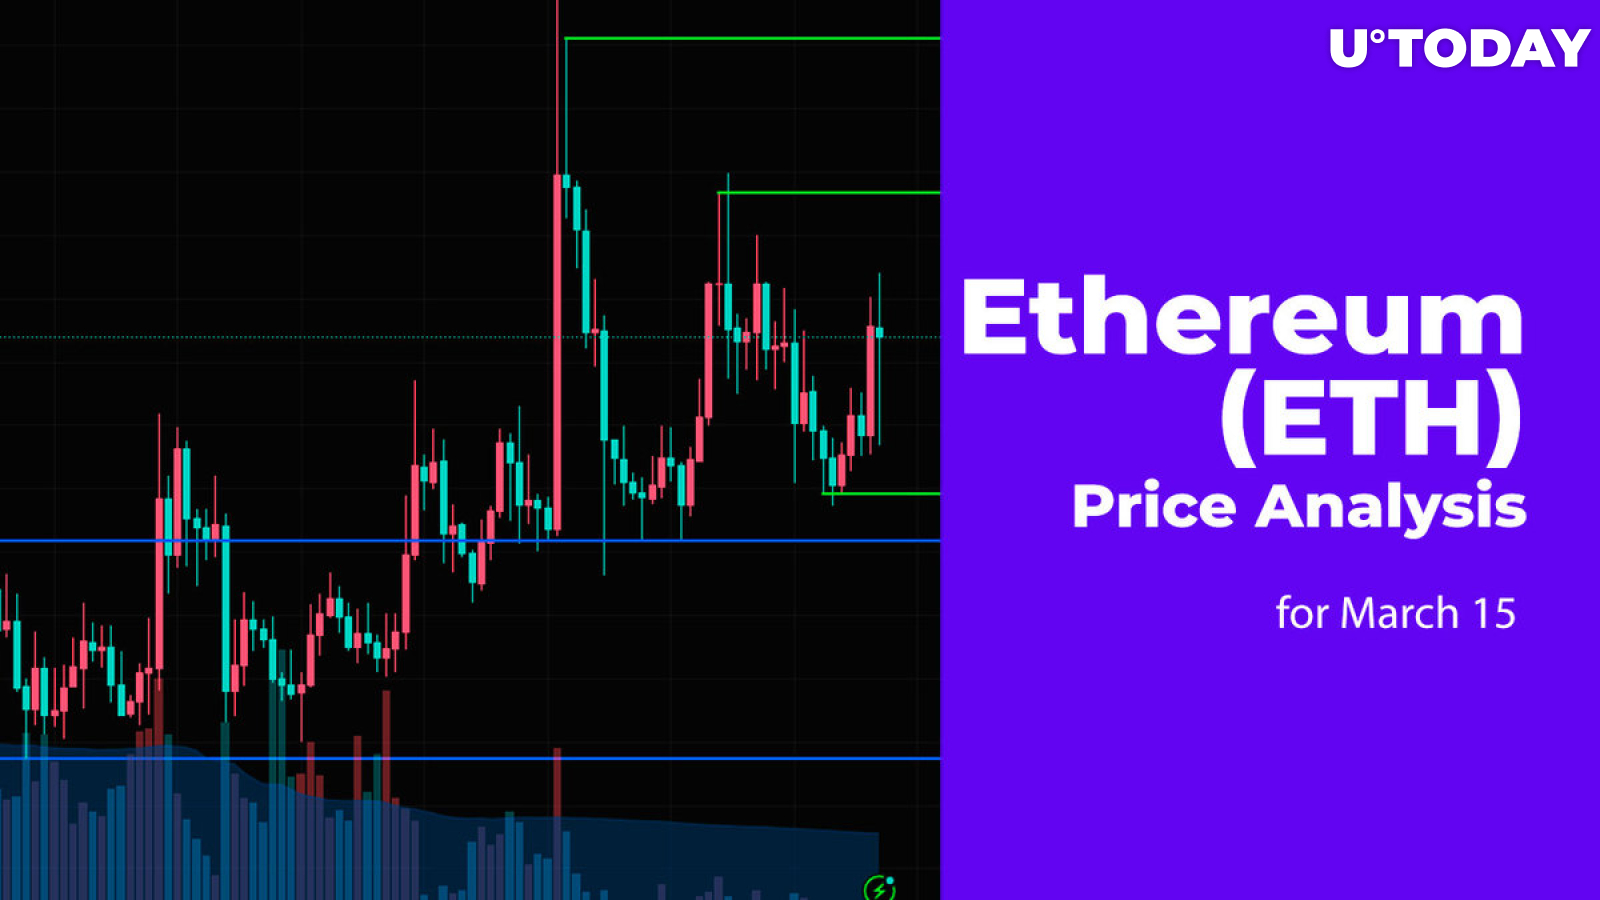 Ethereum (ETH) Price Prediction for March 15